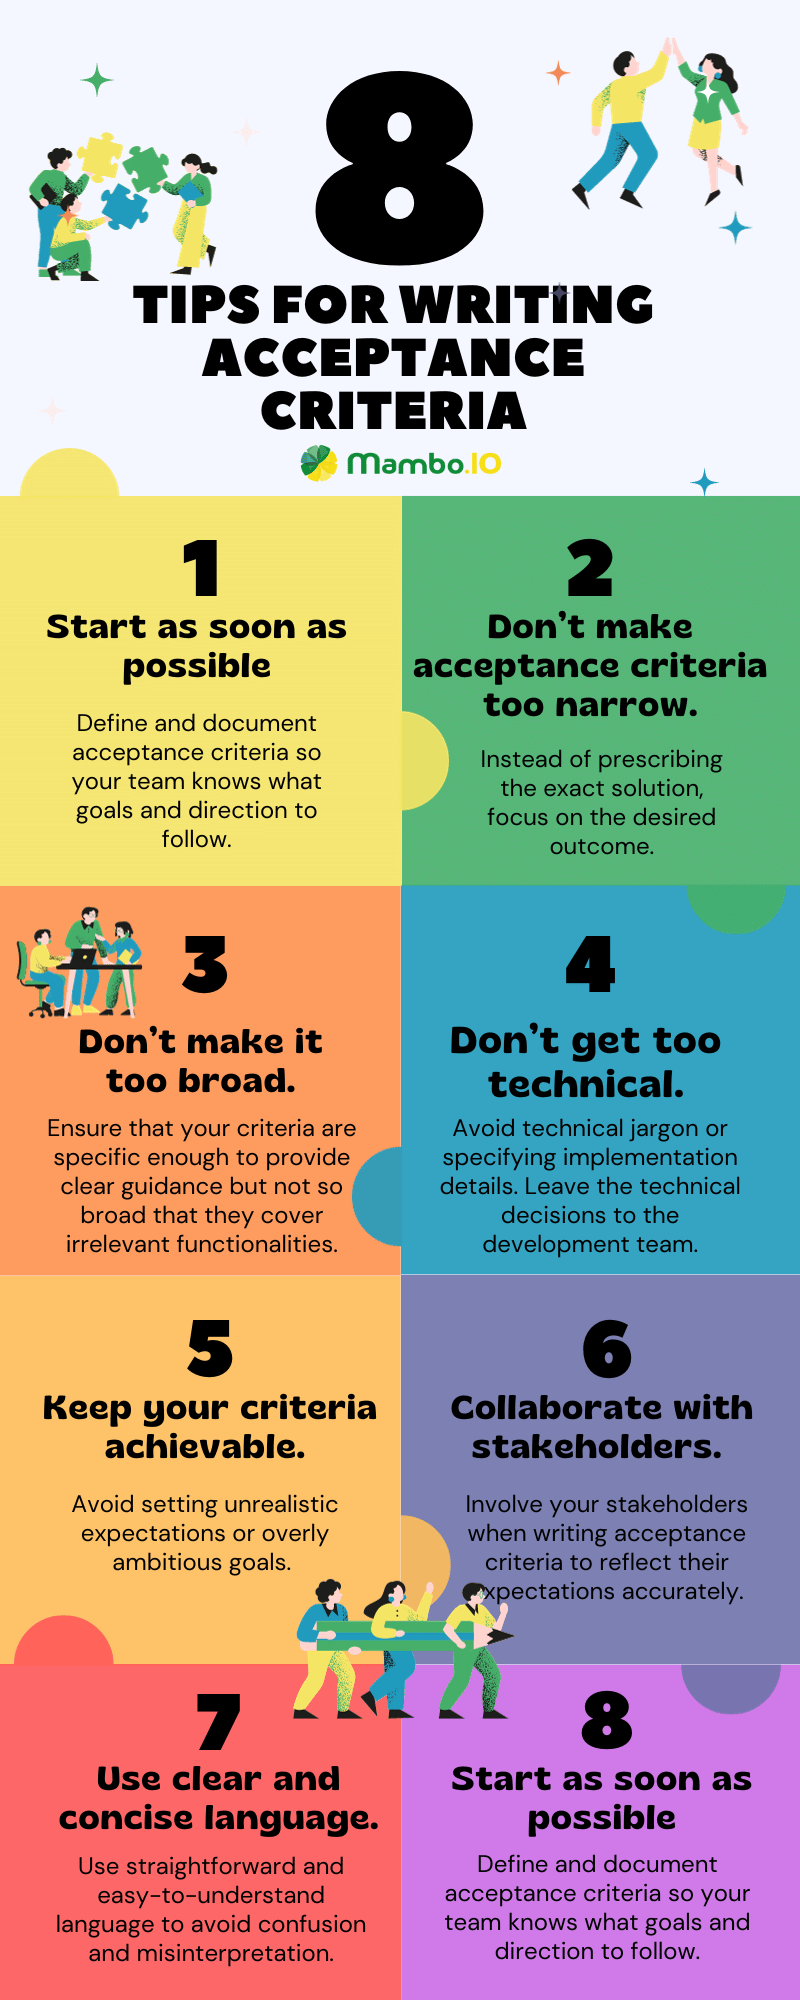 An infographic showing 8 tips for writing acceptance criteria.